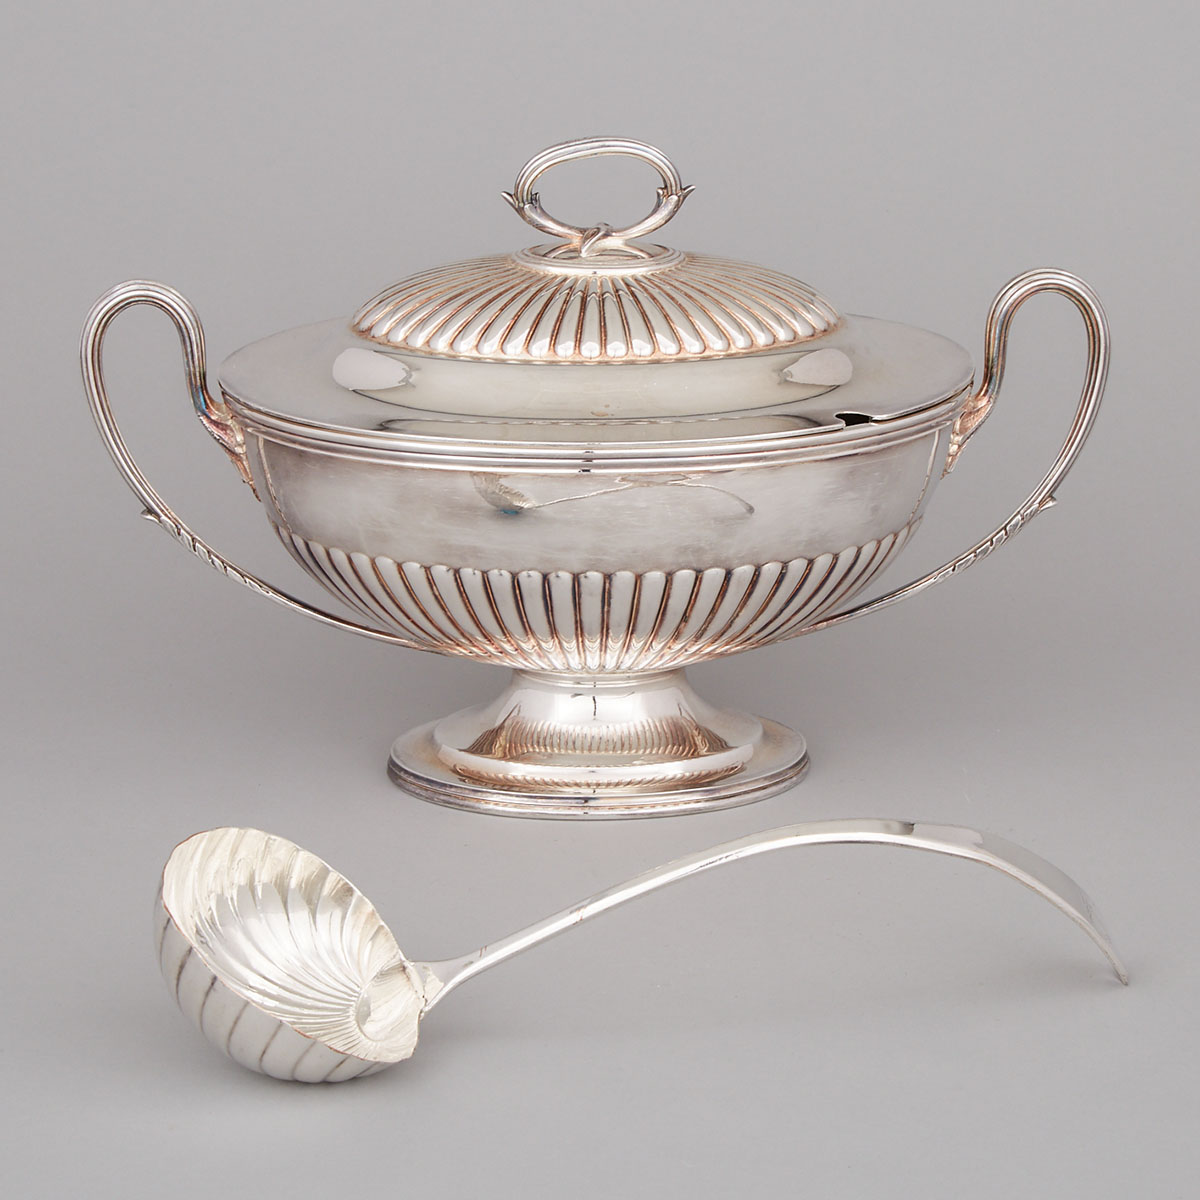 Edwardian Silver Plated Covered Soup Tureen, Atkin Bros., early 20th century